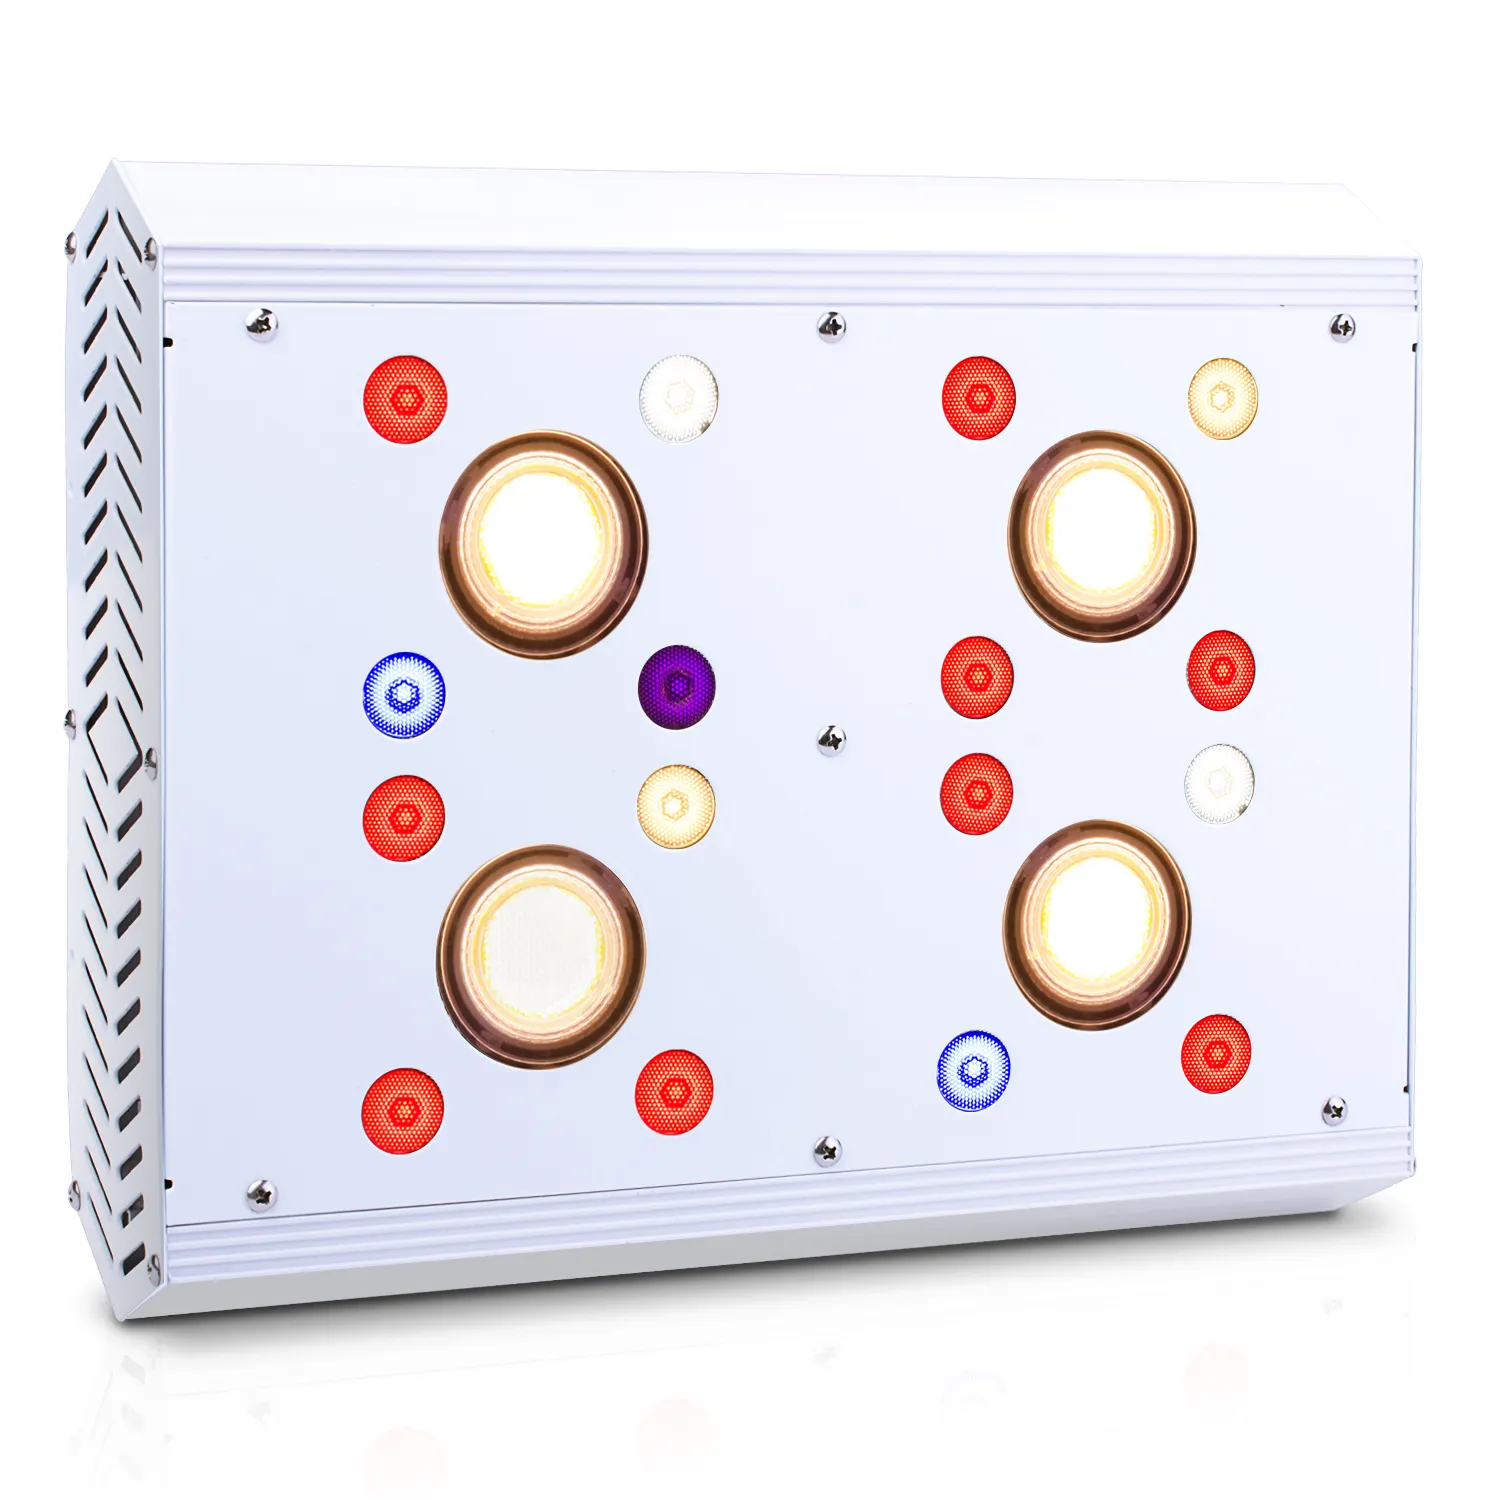 CTLite HG800 commercial LED Lighting Full Spectrum with UV&IR hot sales led grow light for indoor plants Made in China